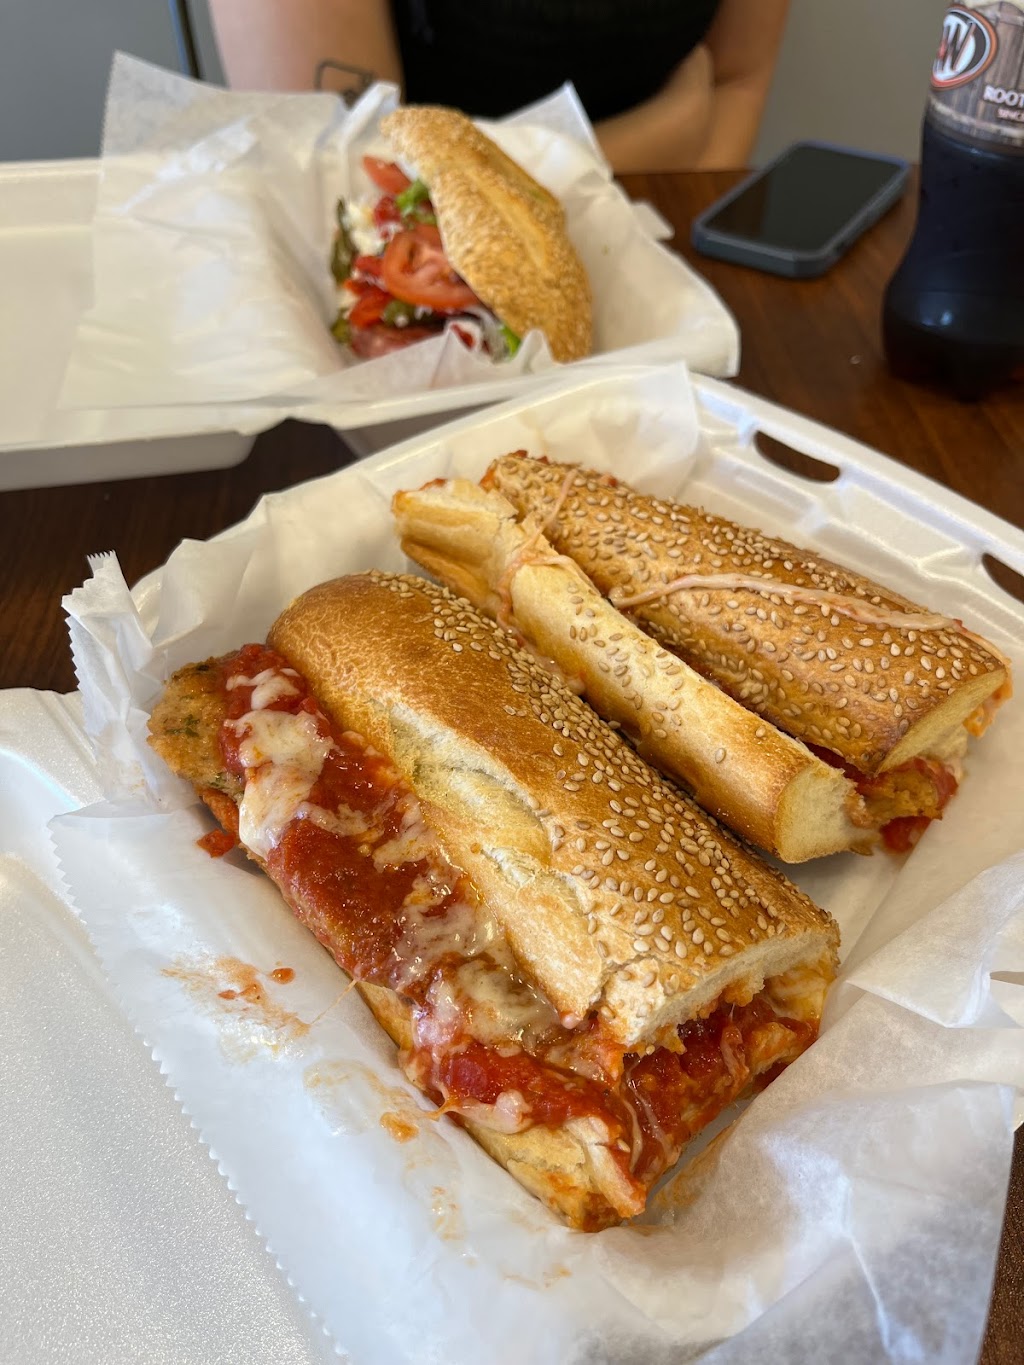 Peppinos Tomato Pies | 449 W Butler Ave, Chalfont, PA 18914 | Phone: (215) 716-7722